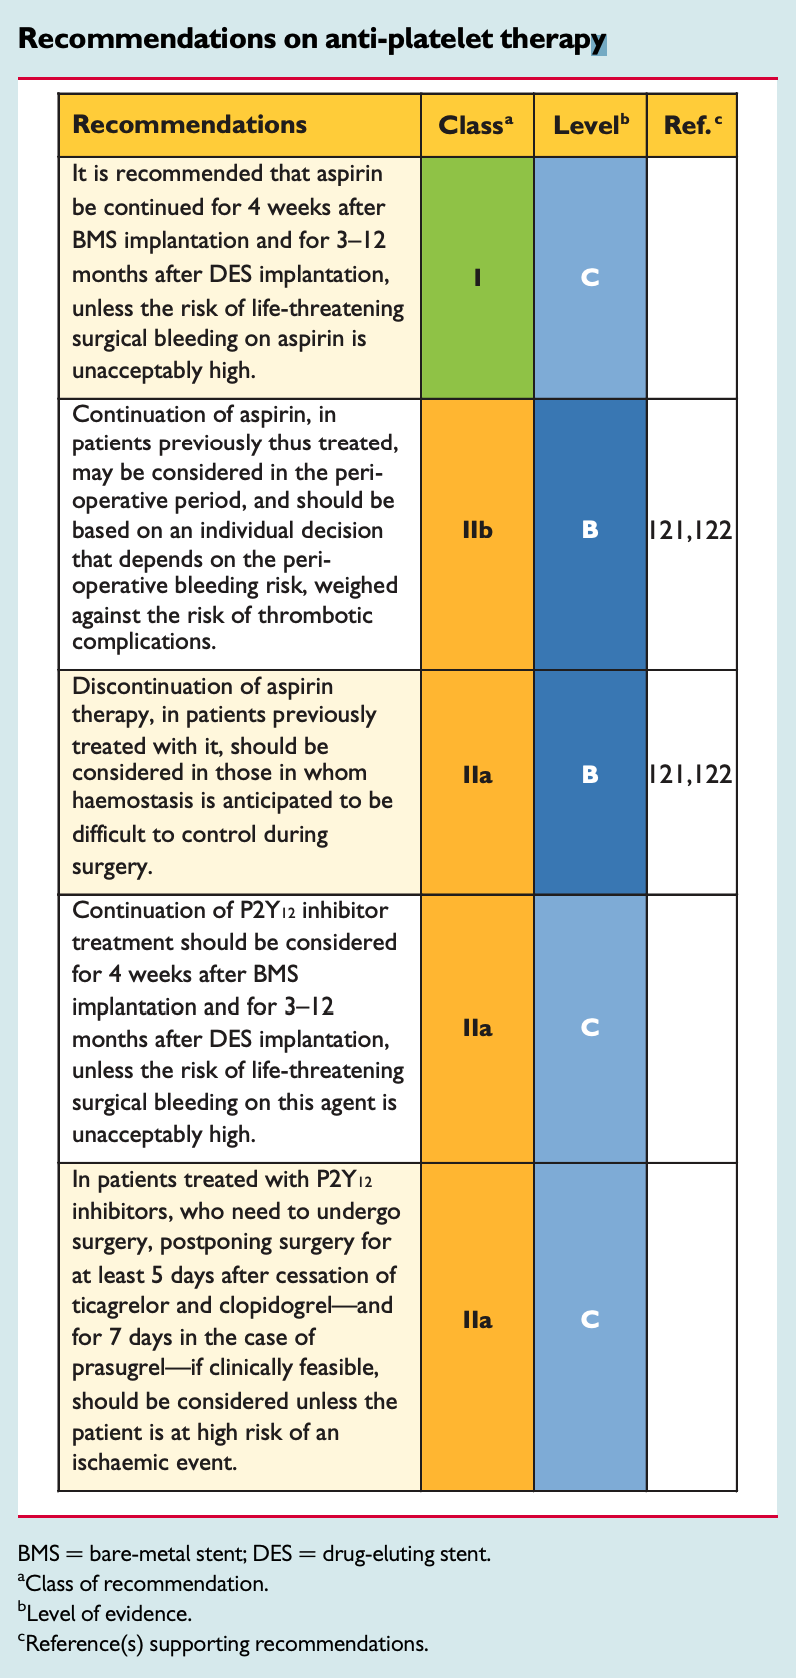 Recommendations on anti-platelet therapy